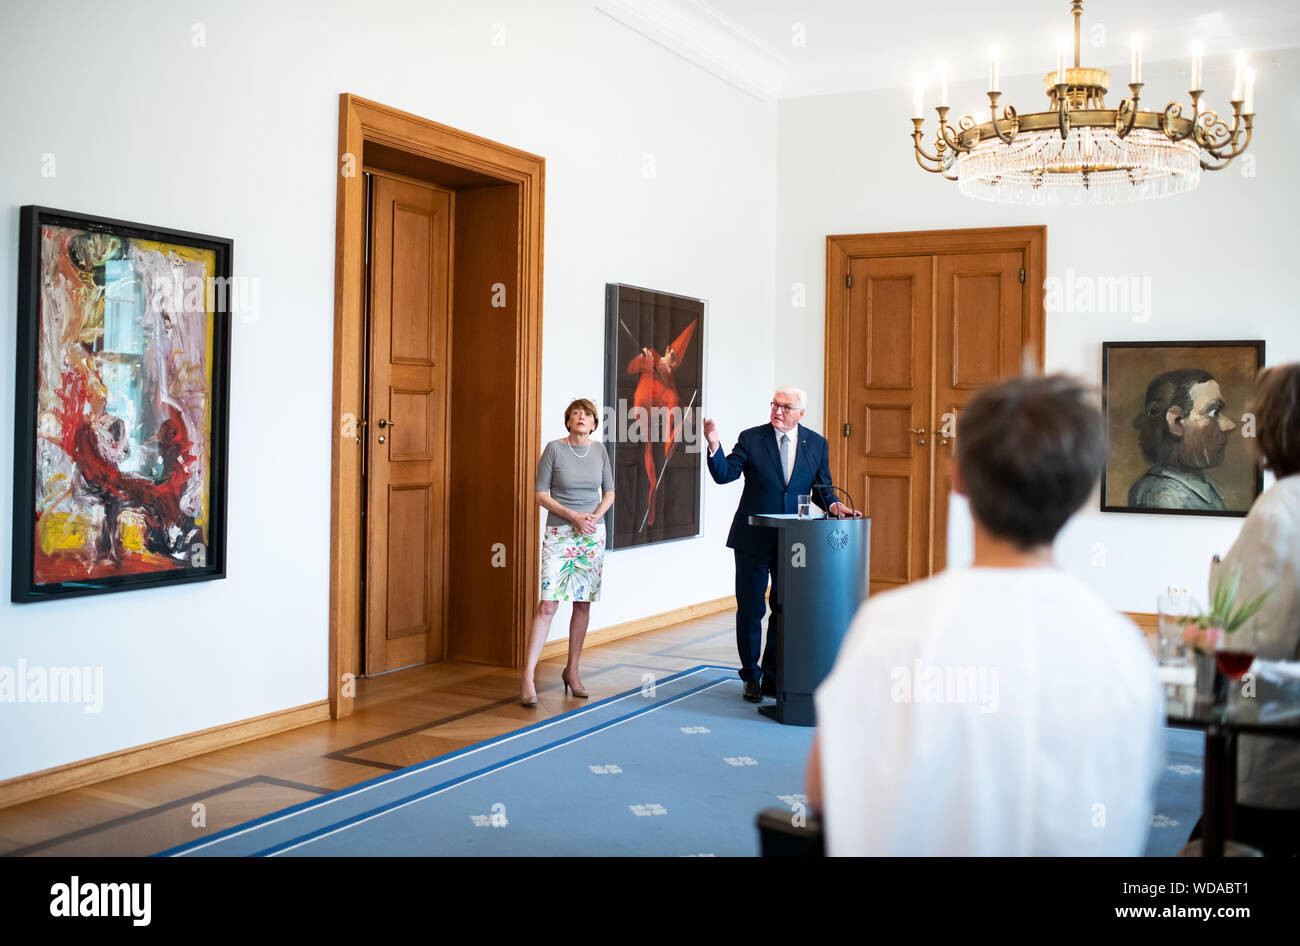 29 August 2019, Berlin: Federal President Frank-Walter Steinmeier speaks in the presence of his wife Elke Büdenbender (l) on the occasion of the presentation of the new equipment of the gallery with paintings from the GDR in Schloss Bellevue. Behind him hangs the painting 'Seiltänzer' (1984) by Trak Wendisch, to the right 'Januskopf' (1977) by Harald Metzkes and to the left 'Kaspar - upside down in ladies boots' (1987) by Hartwig Ebersbach. The exhibition shows pictures of GDR artists in connection with the peaceful revolution 30 years ago. Photo: Bernd von Jutrczenka/dpa Stock Photo